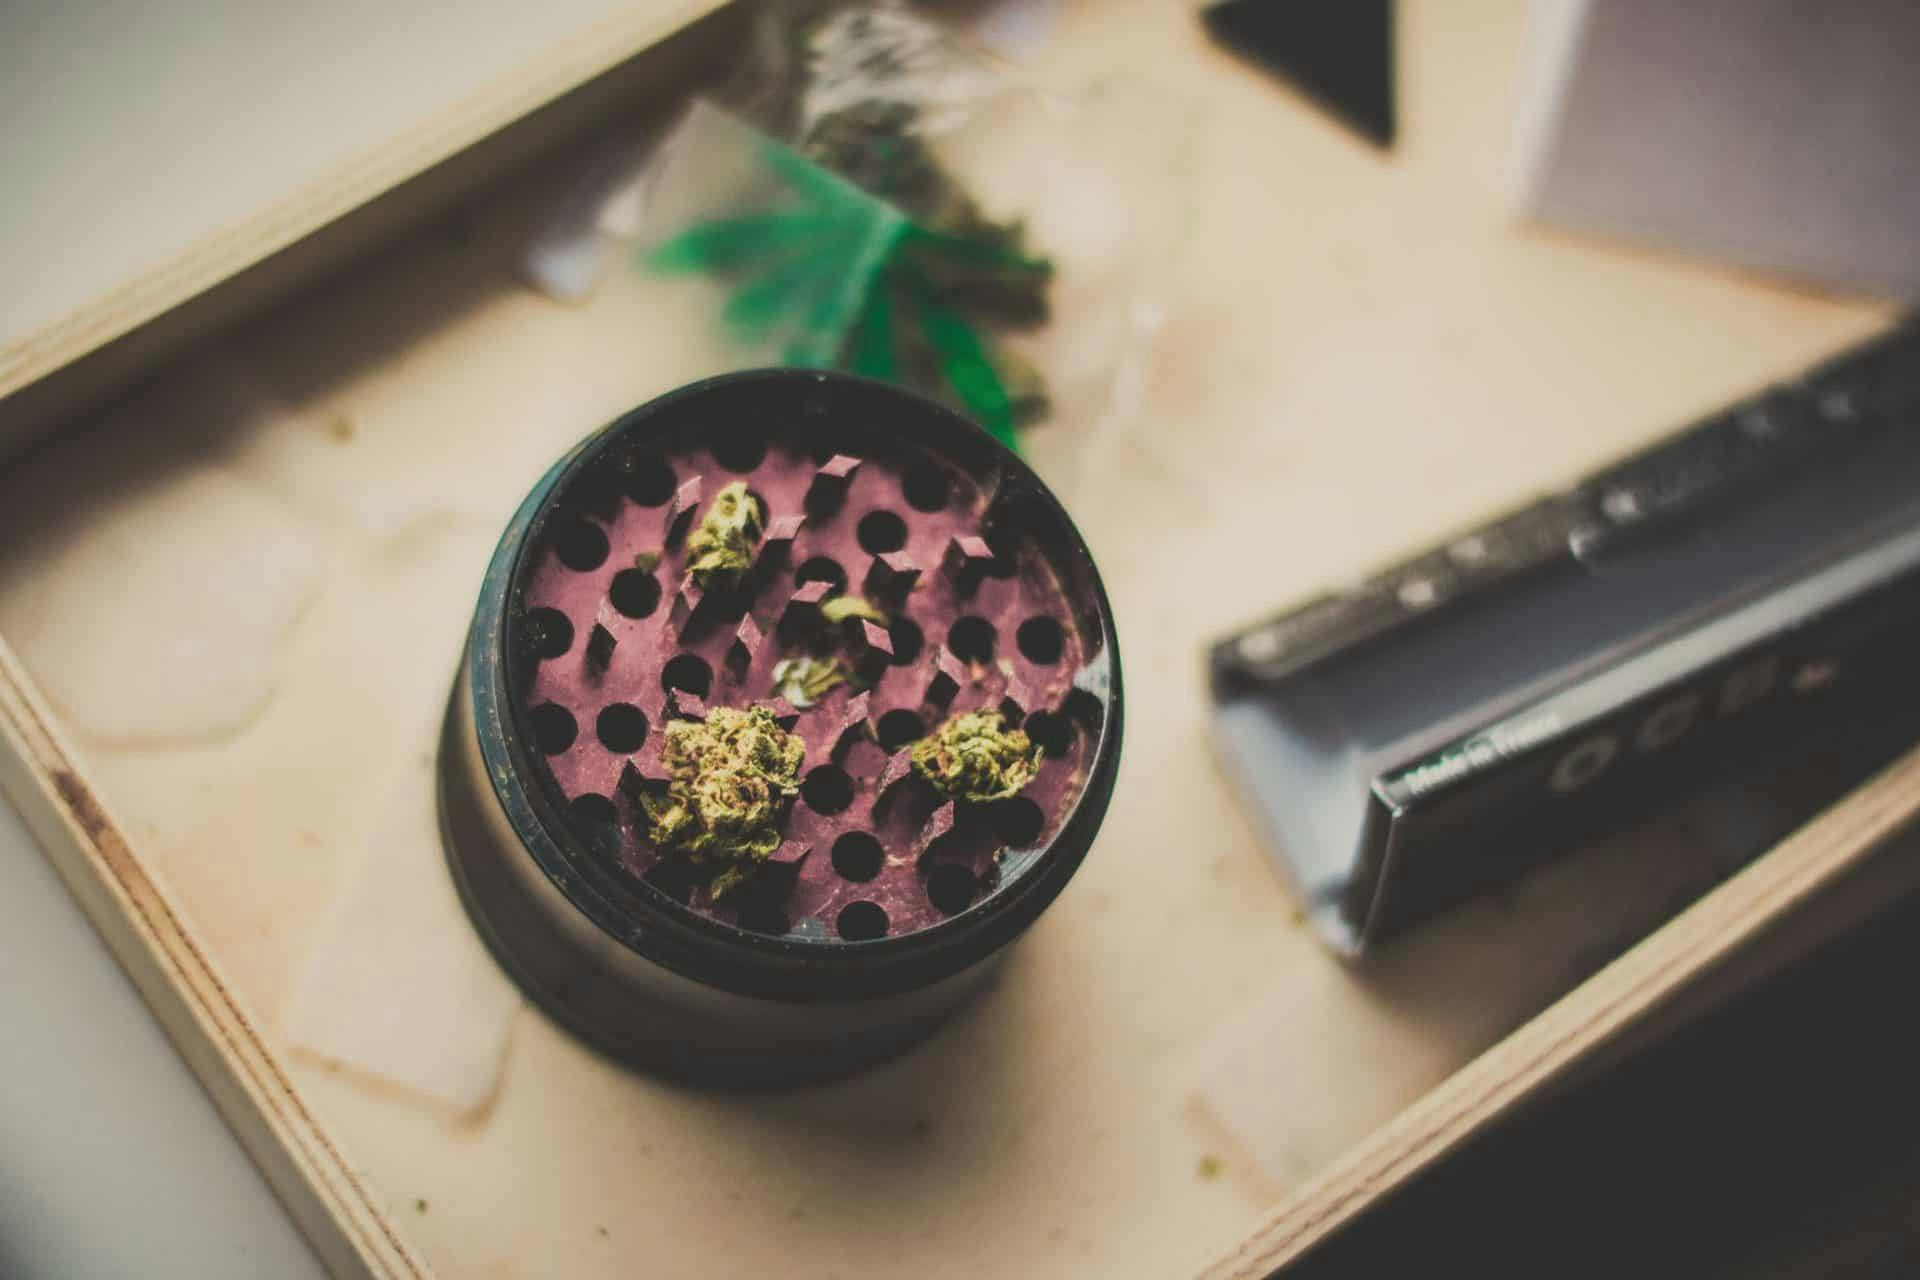 Photo of a weed grinder next to rolling papers.